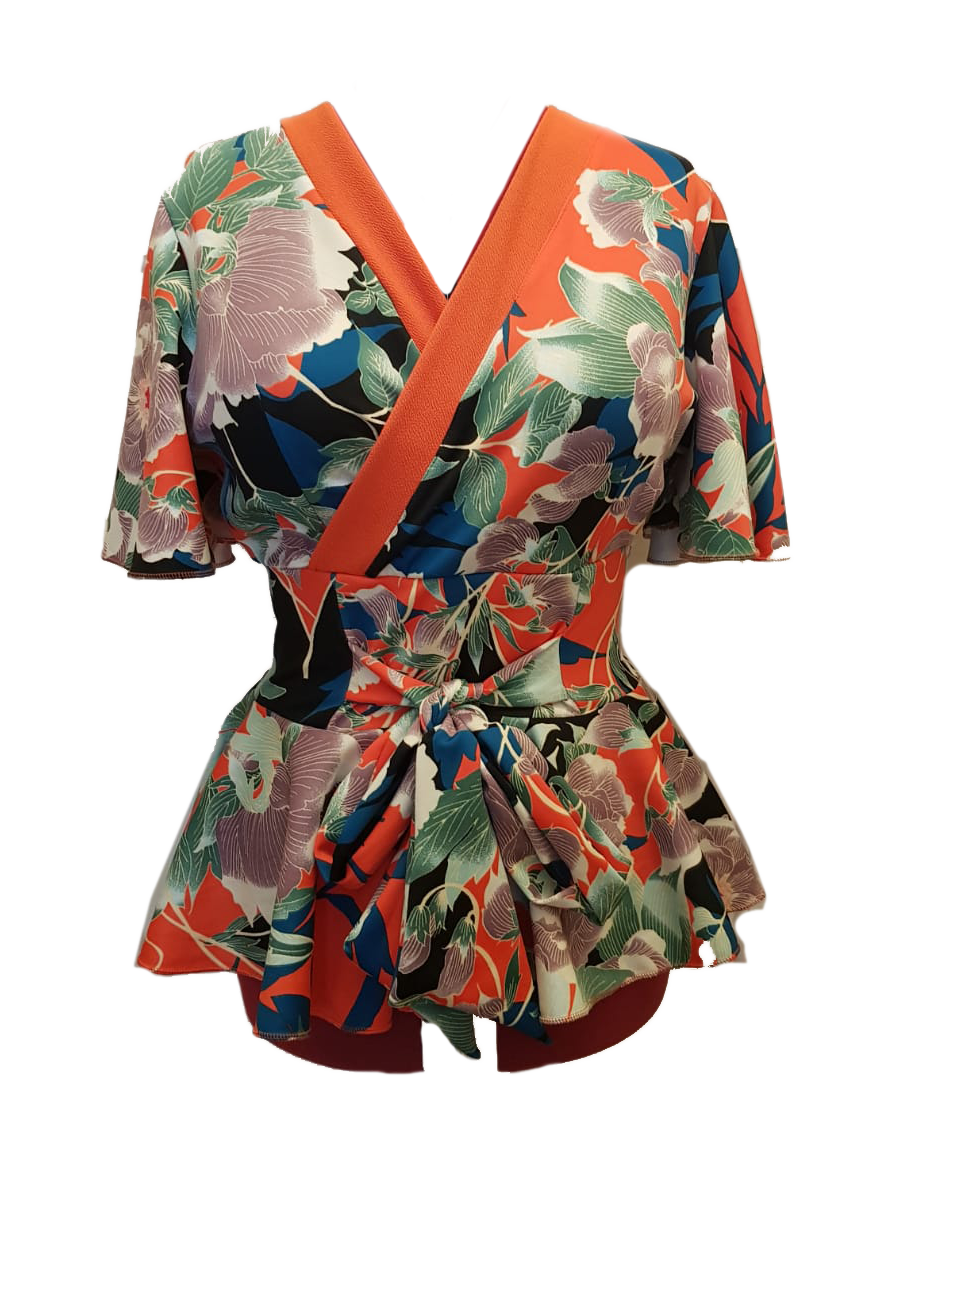 Orange Floral Lap Front Peplum Blouse With Flared Sleeves.